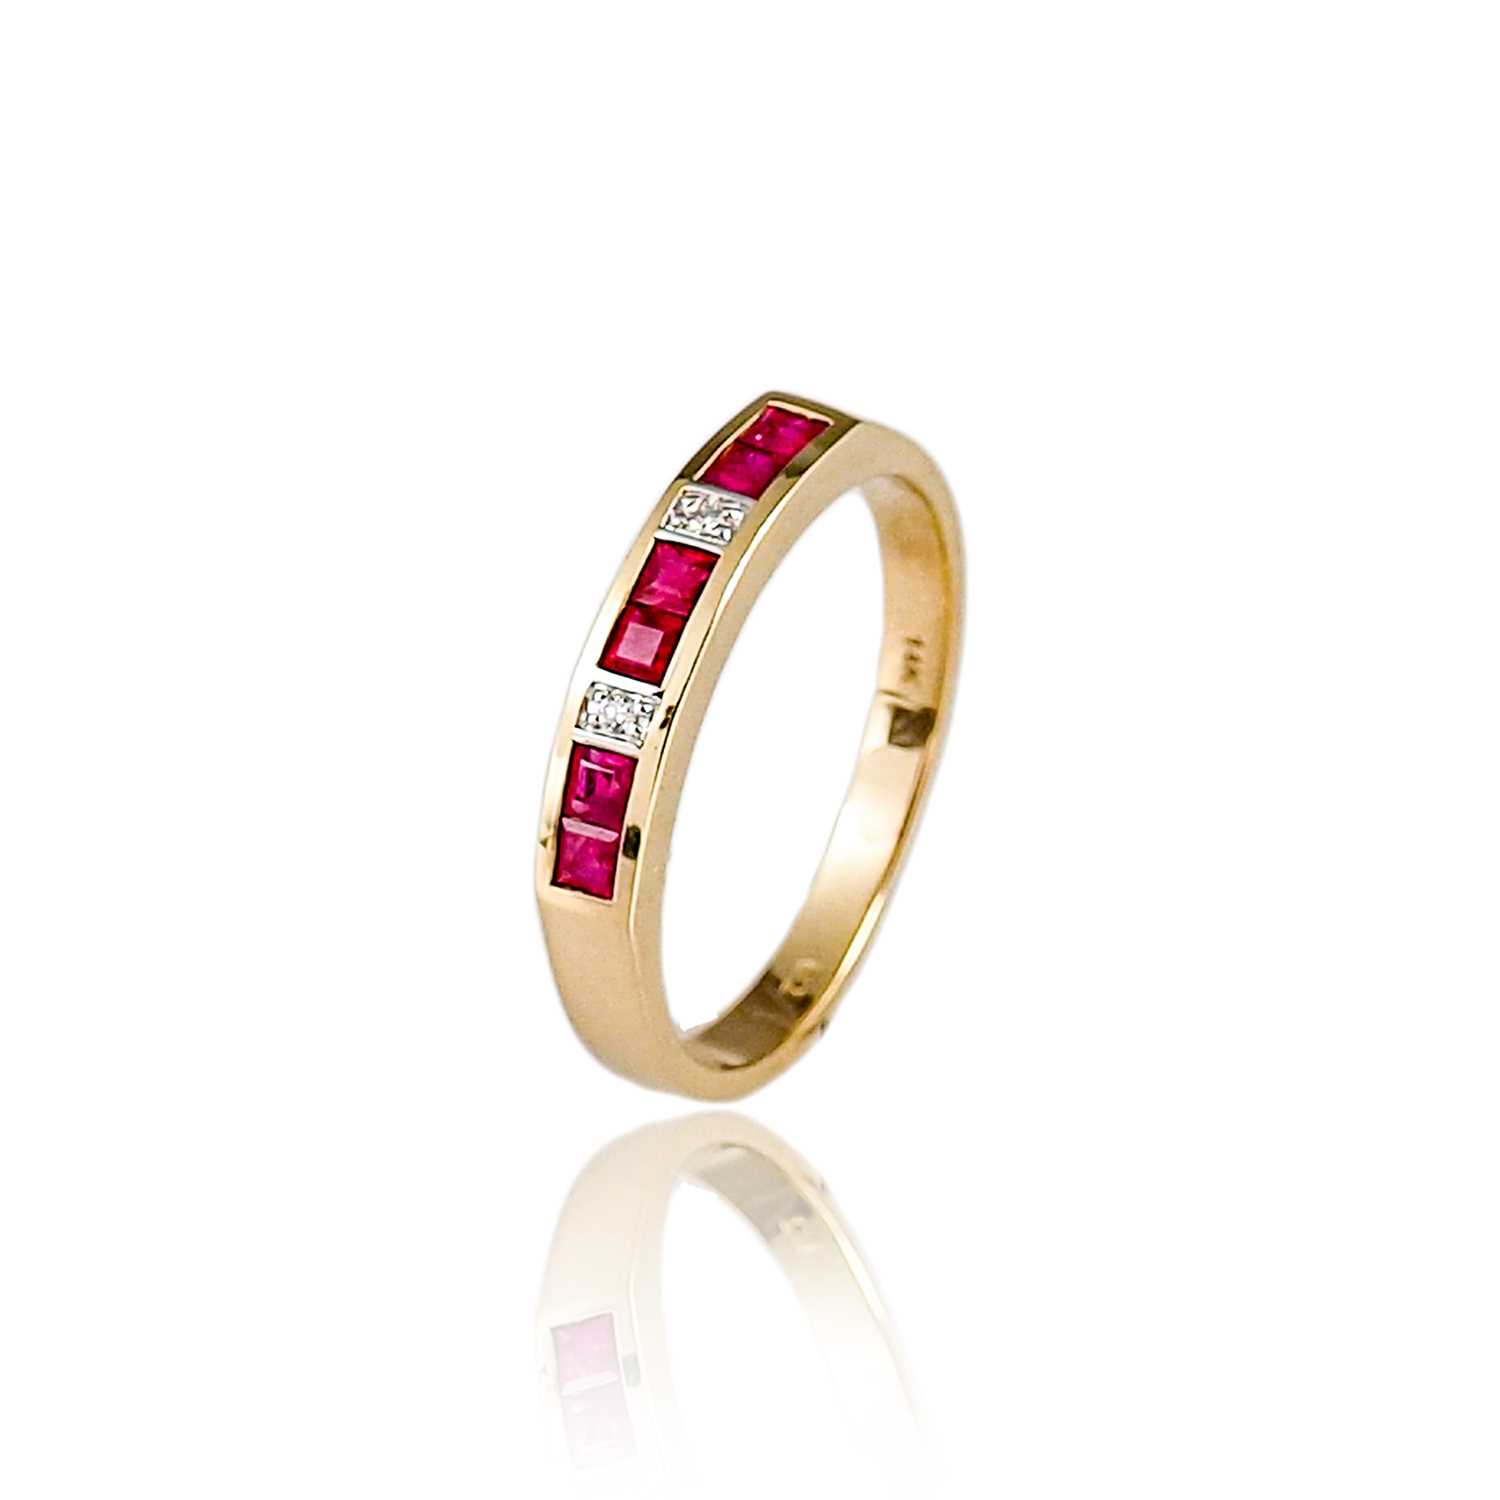 Lot 107 - Gold Ring with Ruby and Diamonds